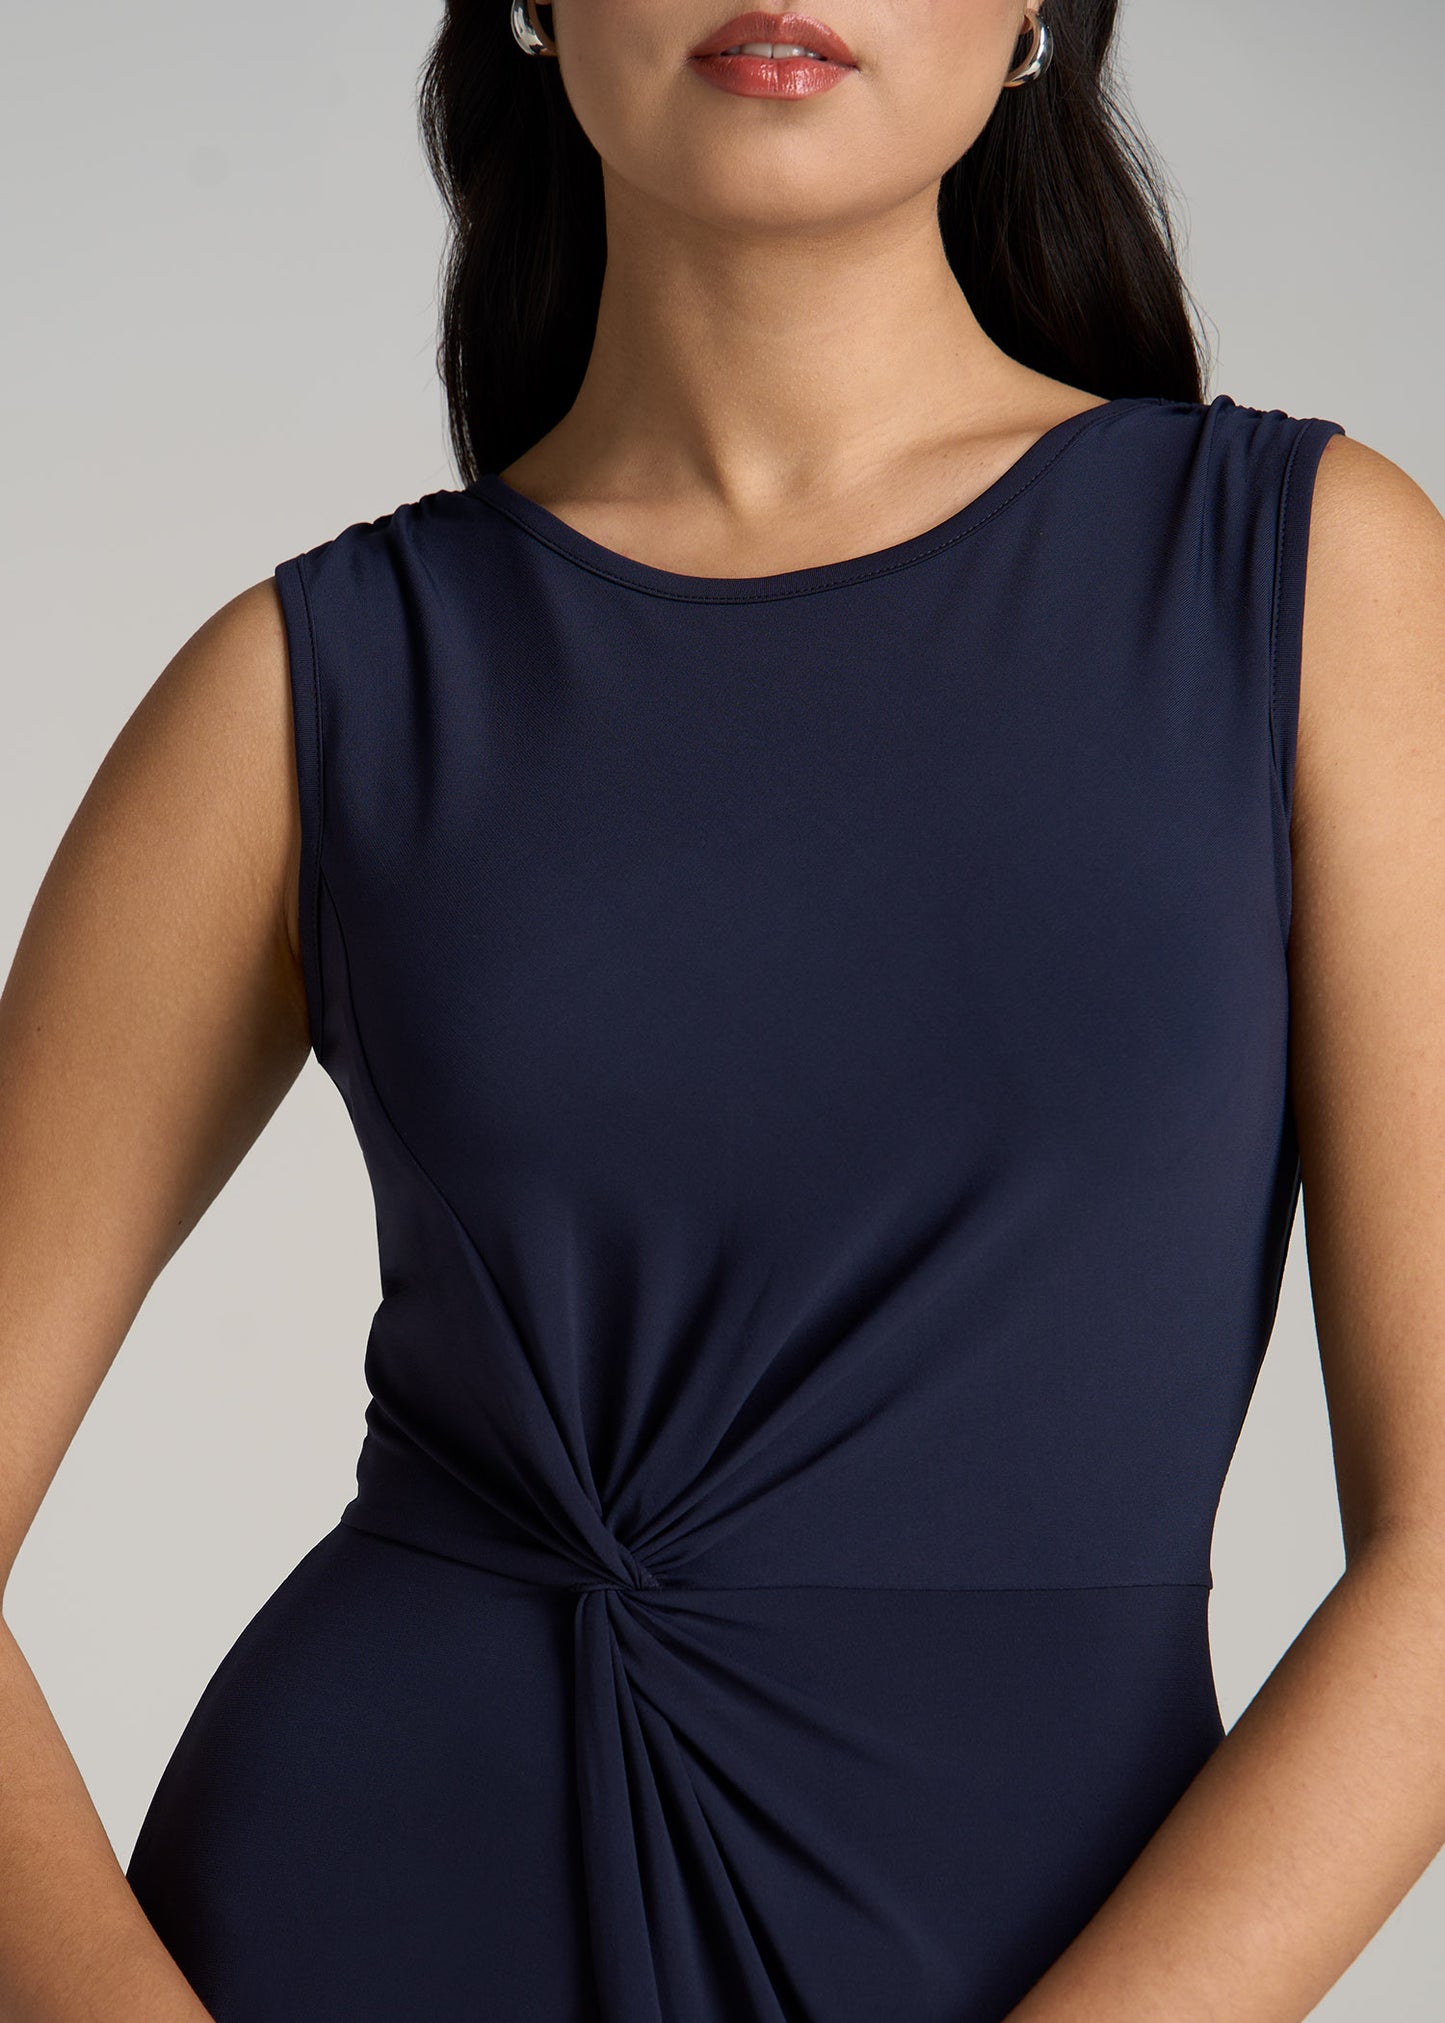 Sleeveless Knot Front Dress for Tall Women in Navy